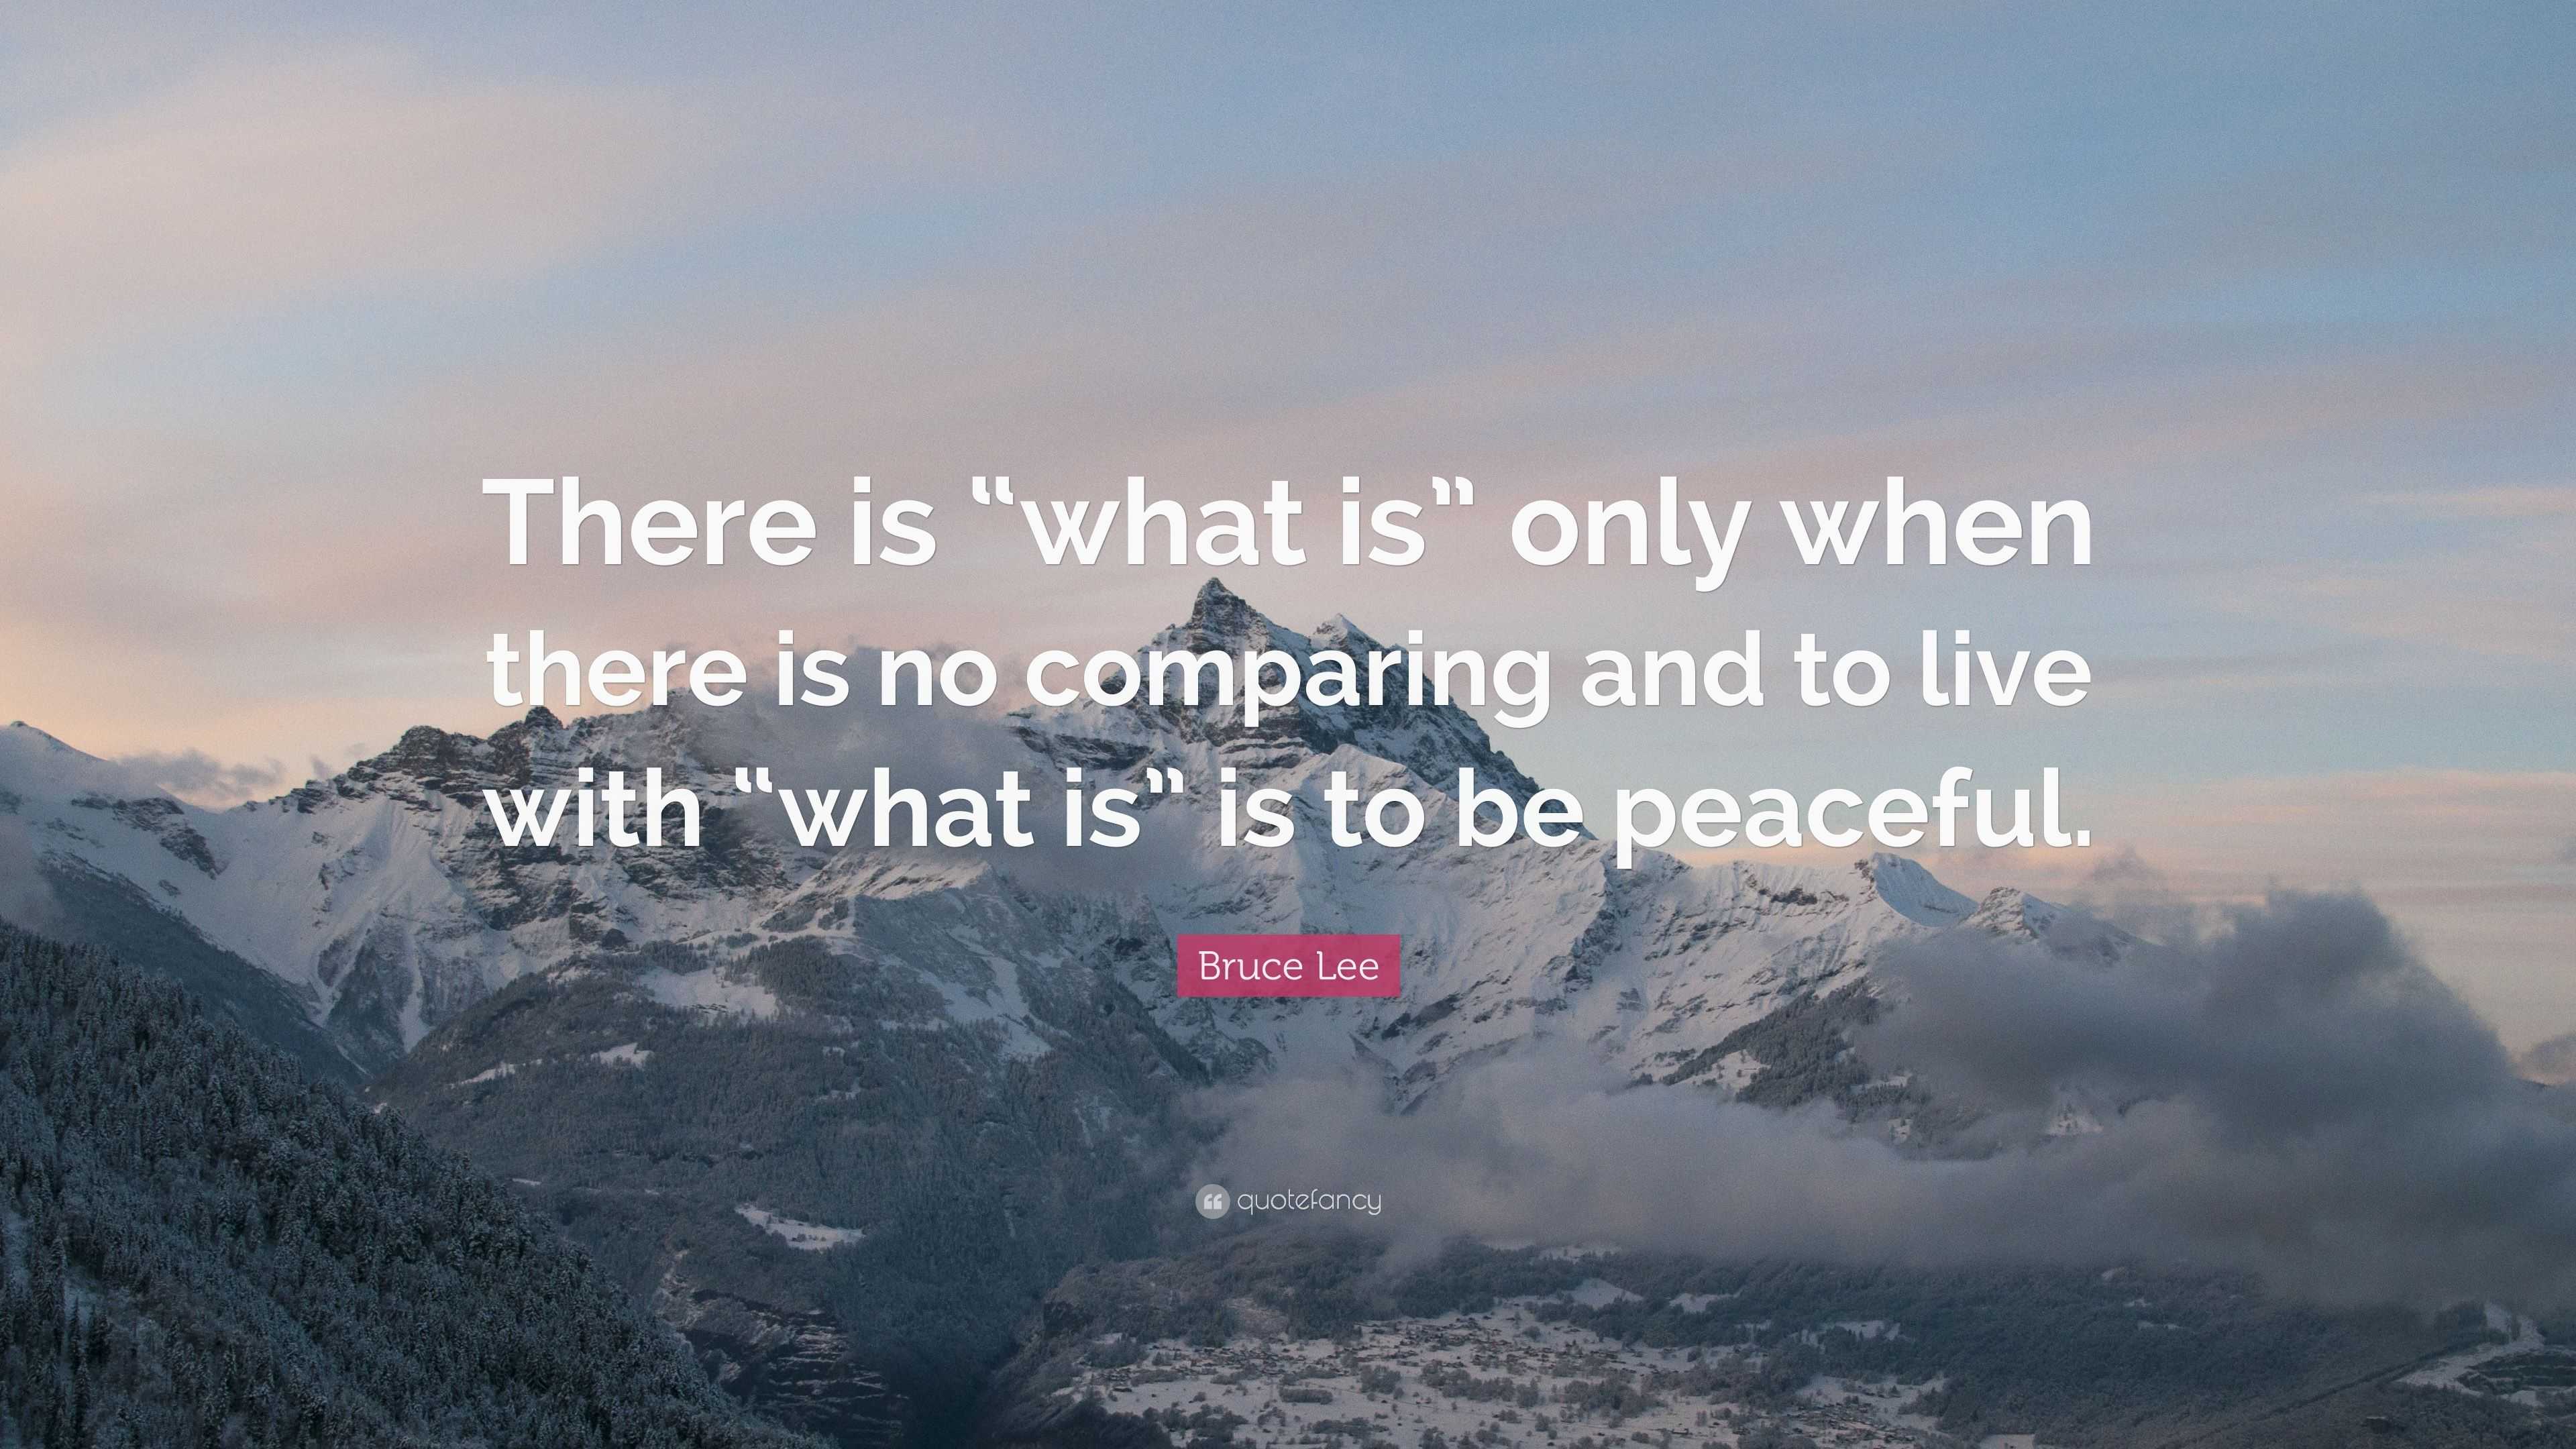 Bruce Lee Quote: “There is “what is” only when there is no comparing and to  live